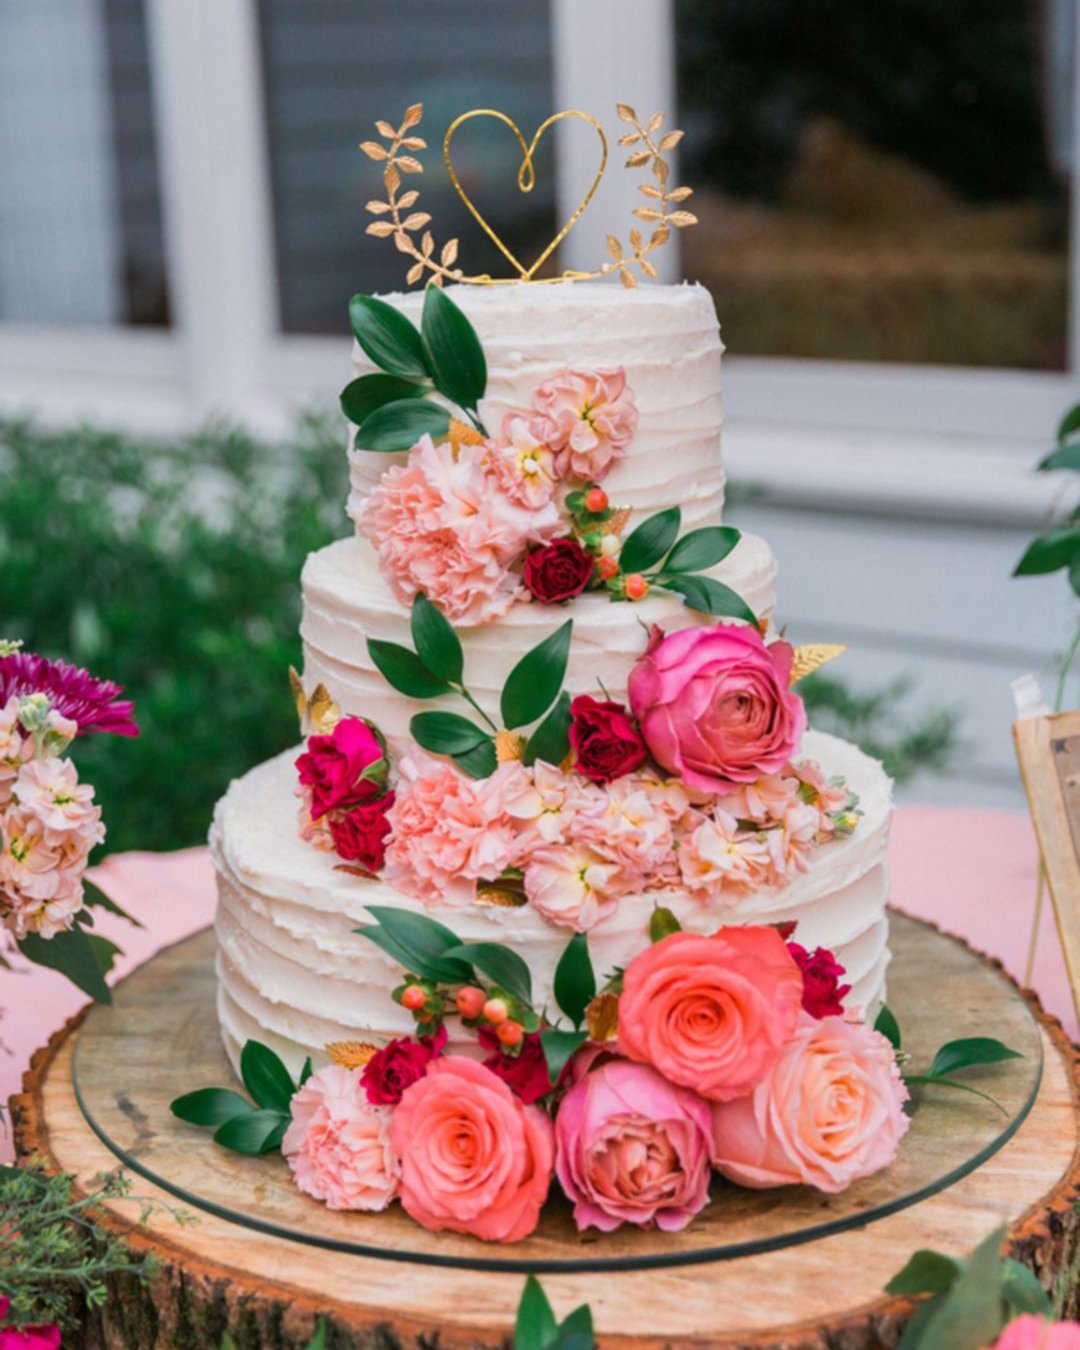 beautiful wedding cakes three tiered white cake with flowers and a golden heart on top ava moore photography